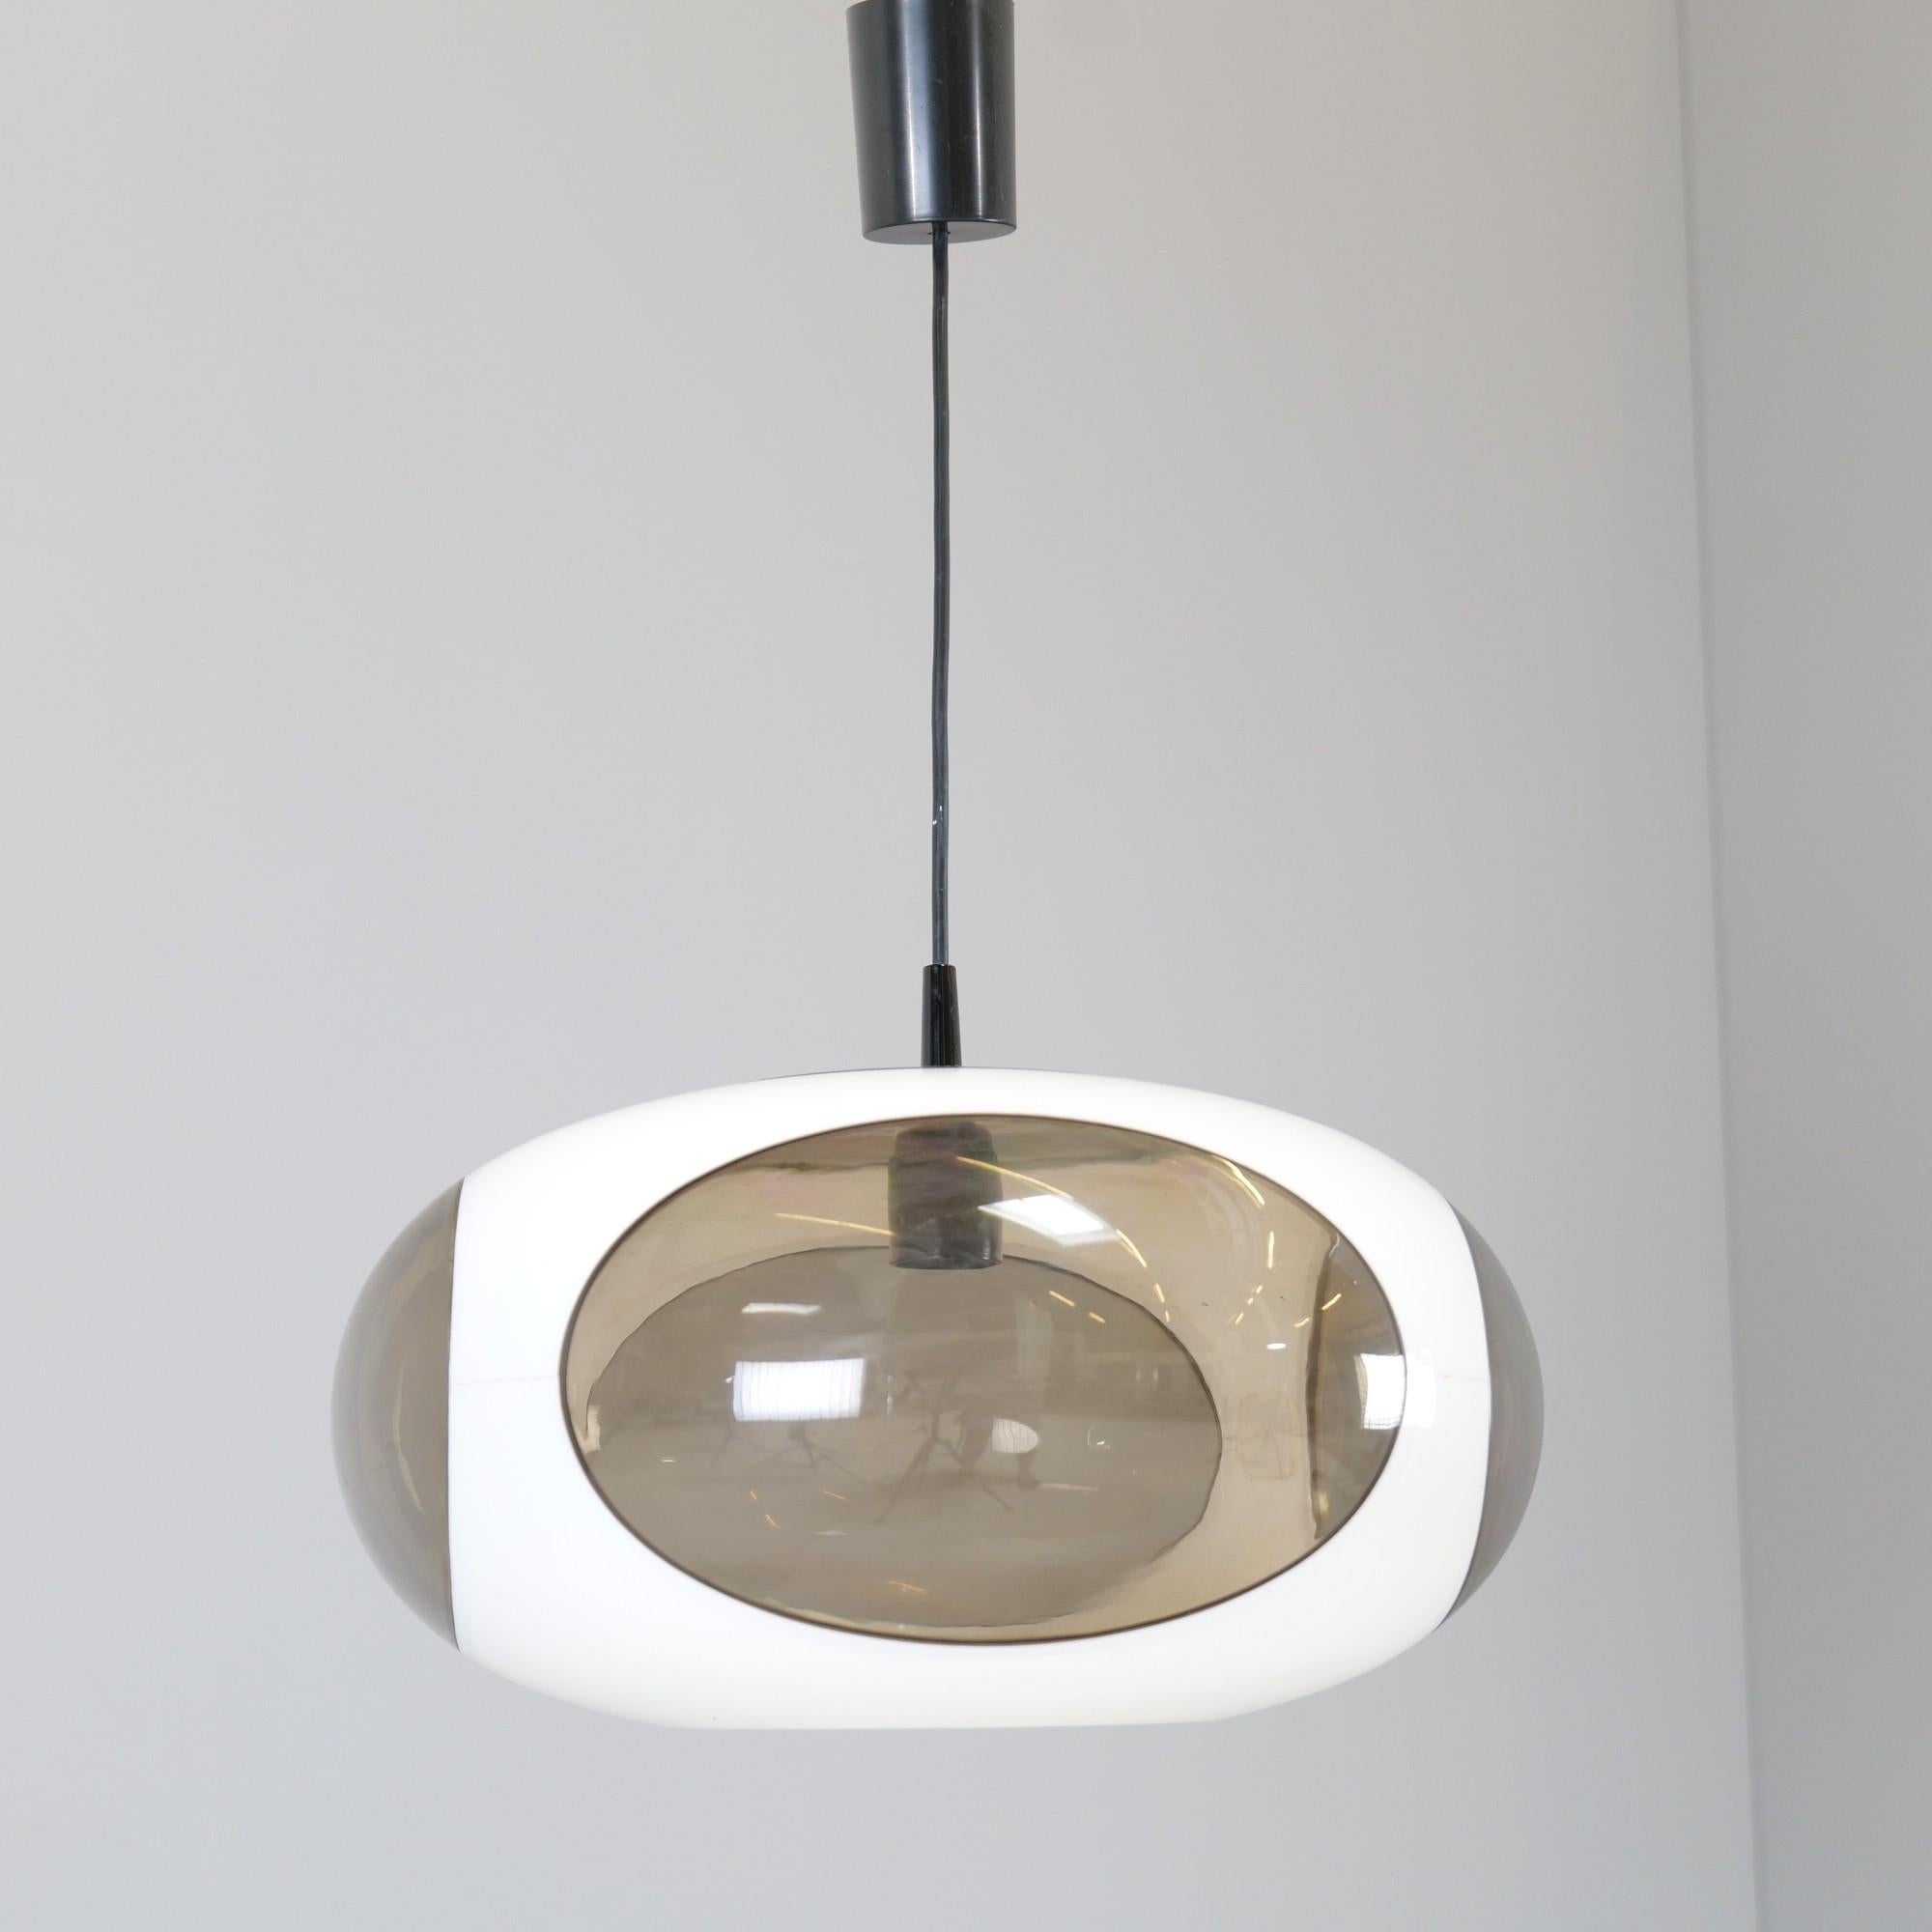 Rare space-age lamp from Massive Belgium in the style of Luigi Colani.

Dimensions:
85 cm height (cable is easily replaceable variable).
40 cm width/diameter
Material:
acrylic, plastic
white colour
E27 socket up to 250 V (LED recommended)